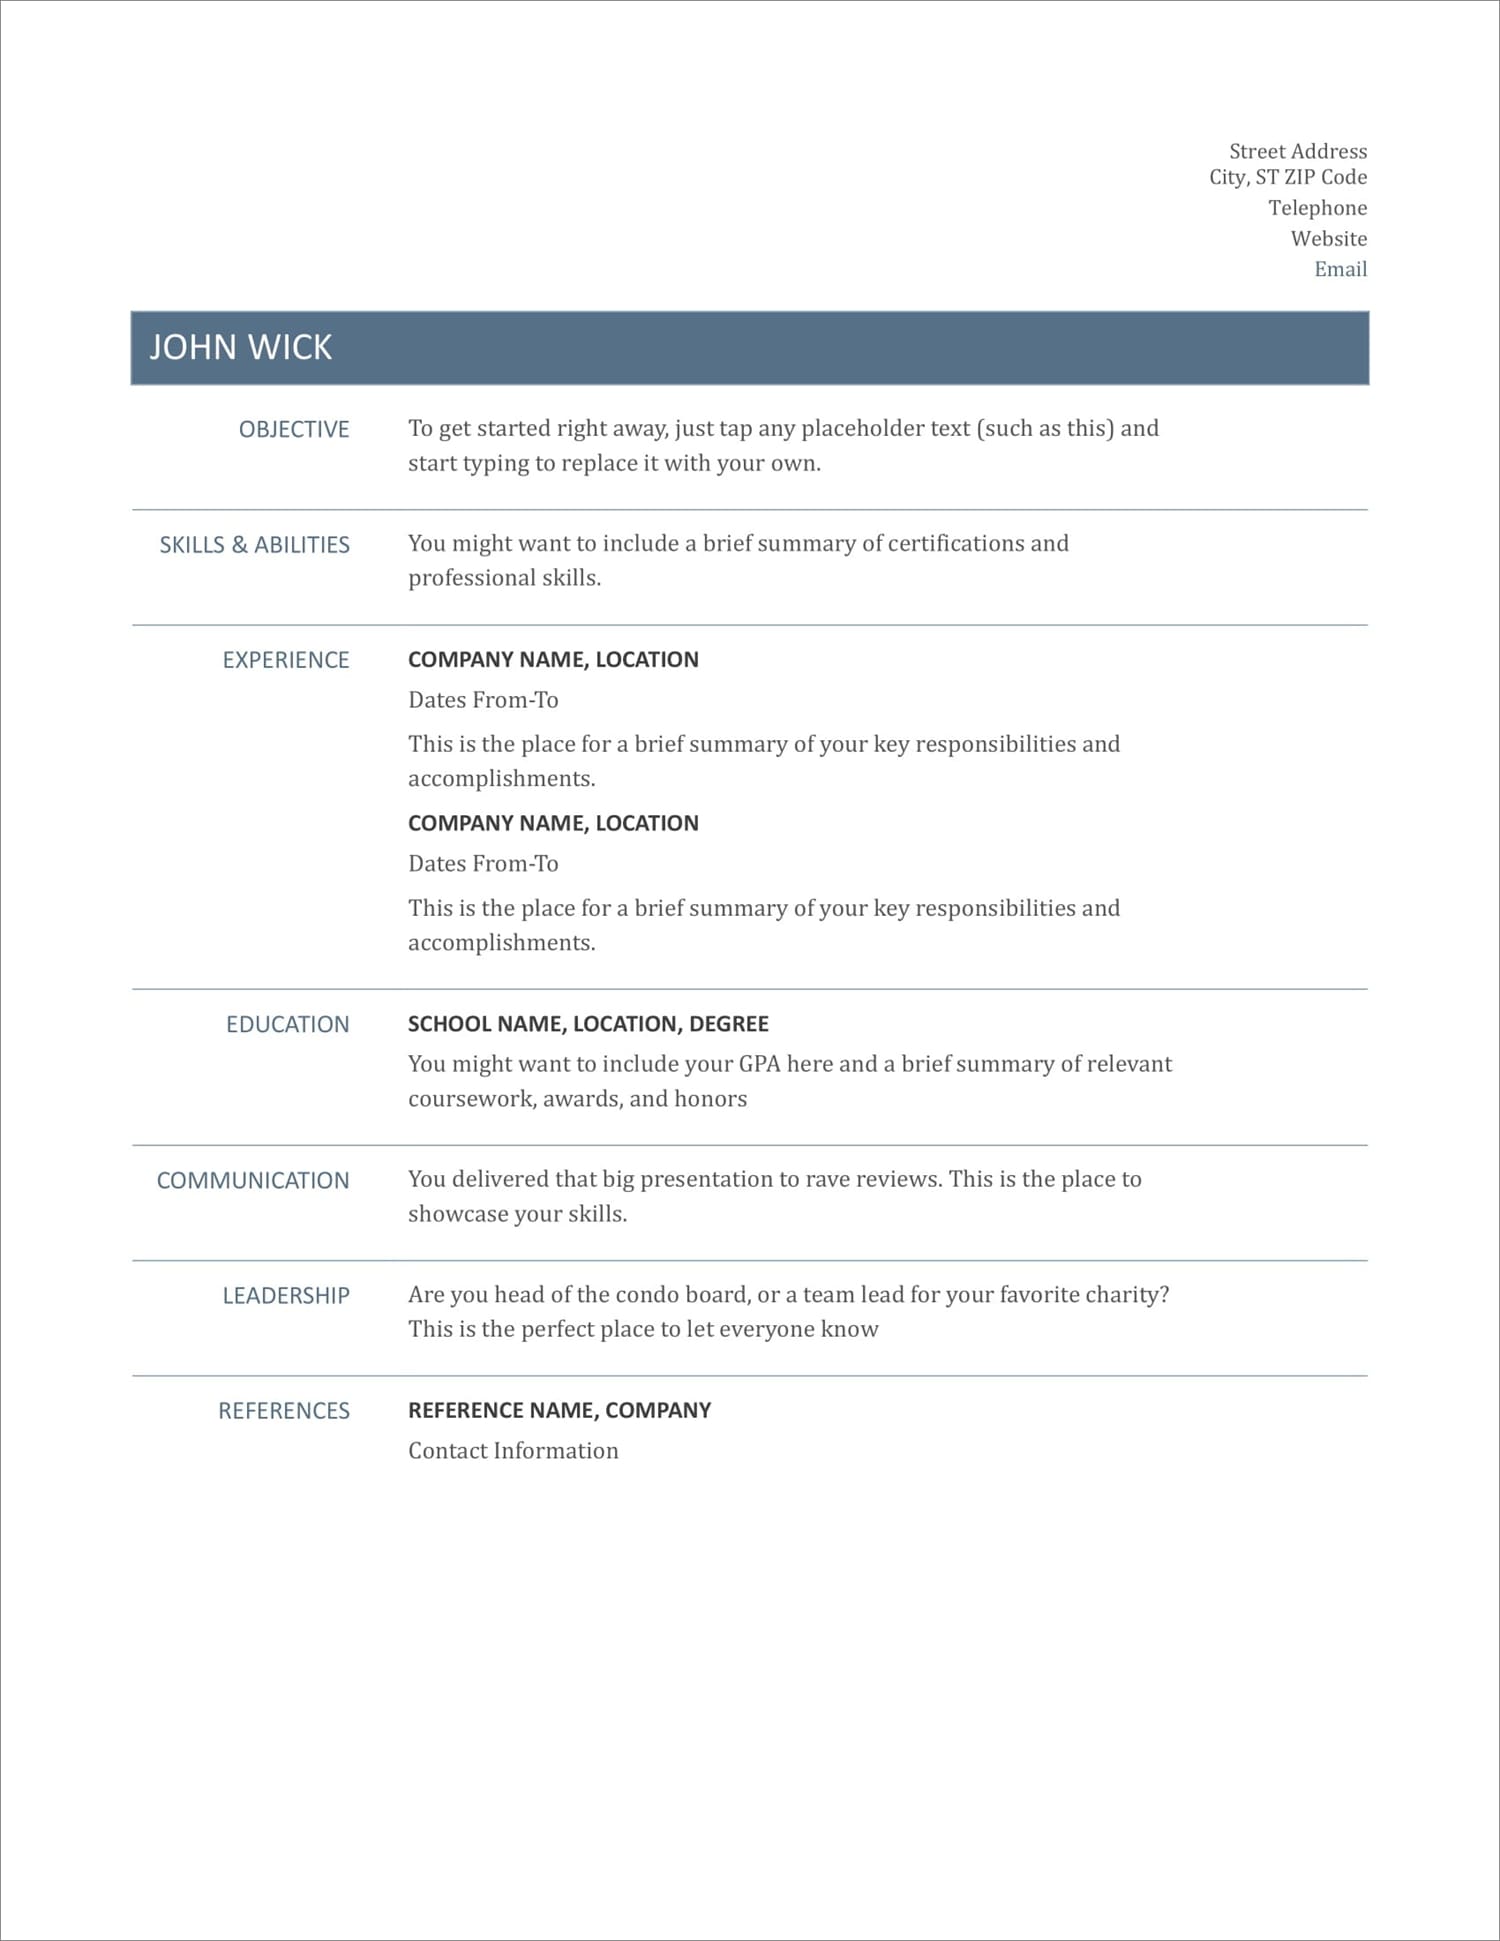 17 Free Resume Templates For 2020 To Download Now